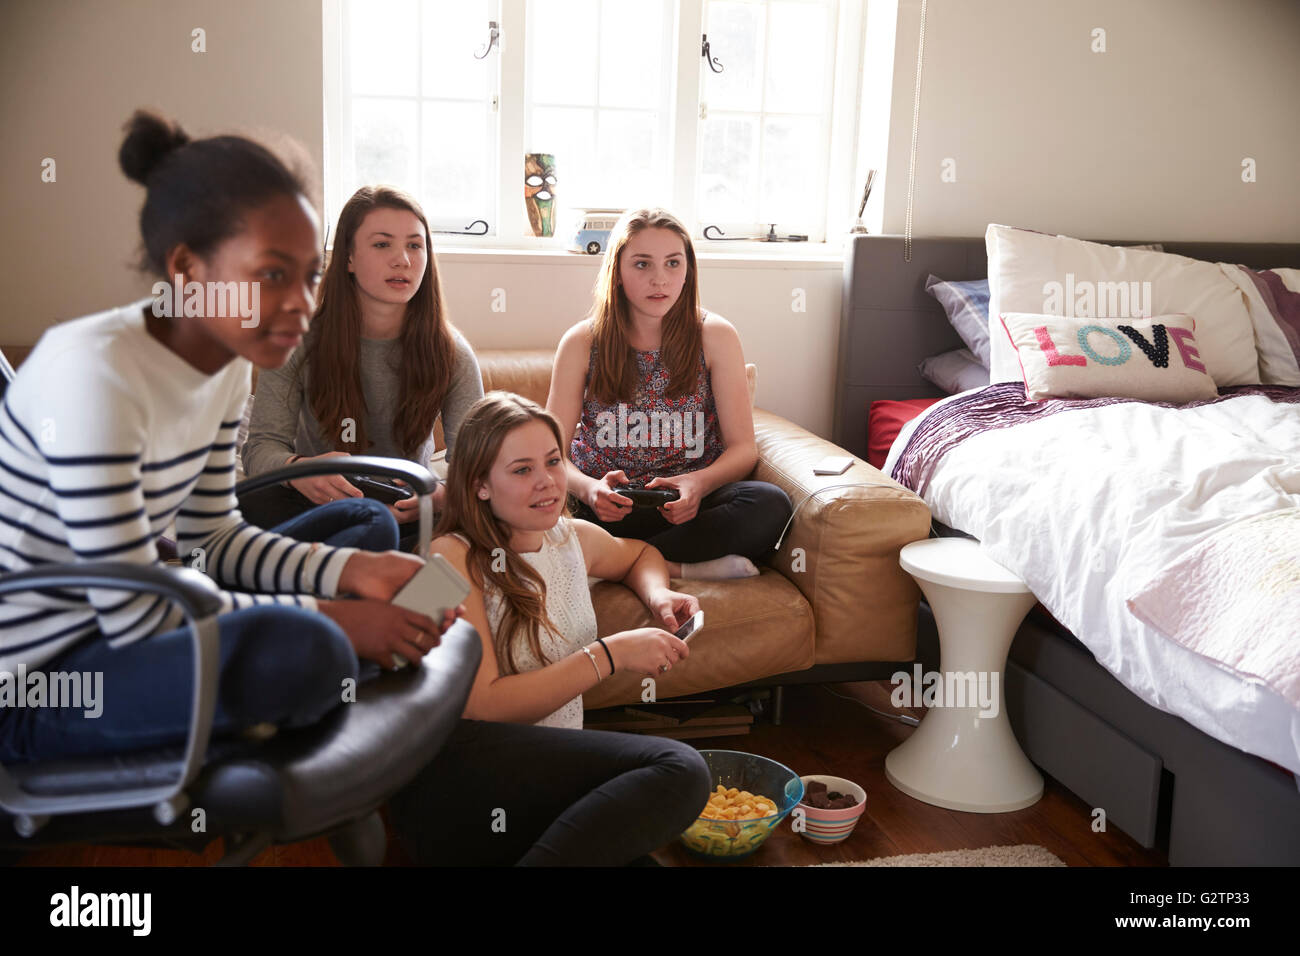 Group Of Teenage Girls Playing Video Game In Bedroom Stock Photo